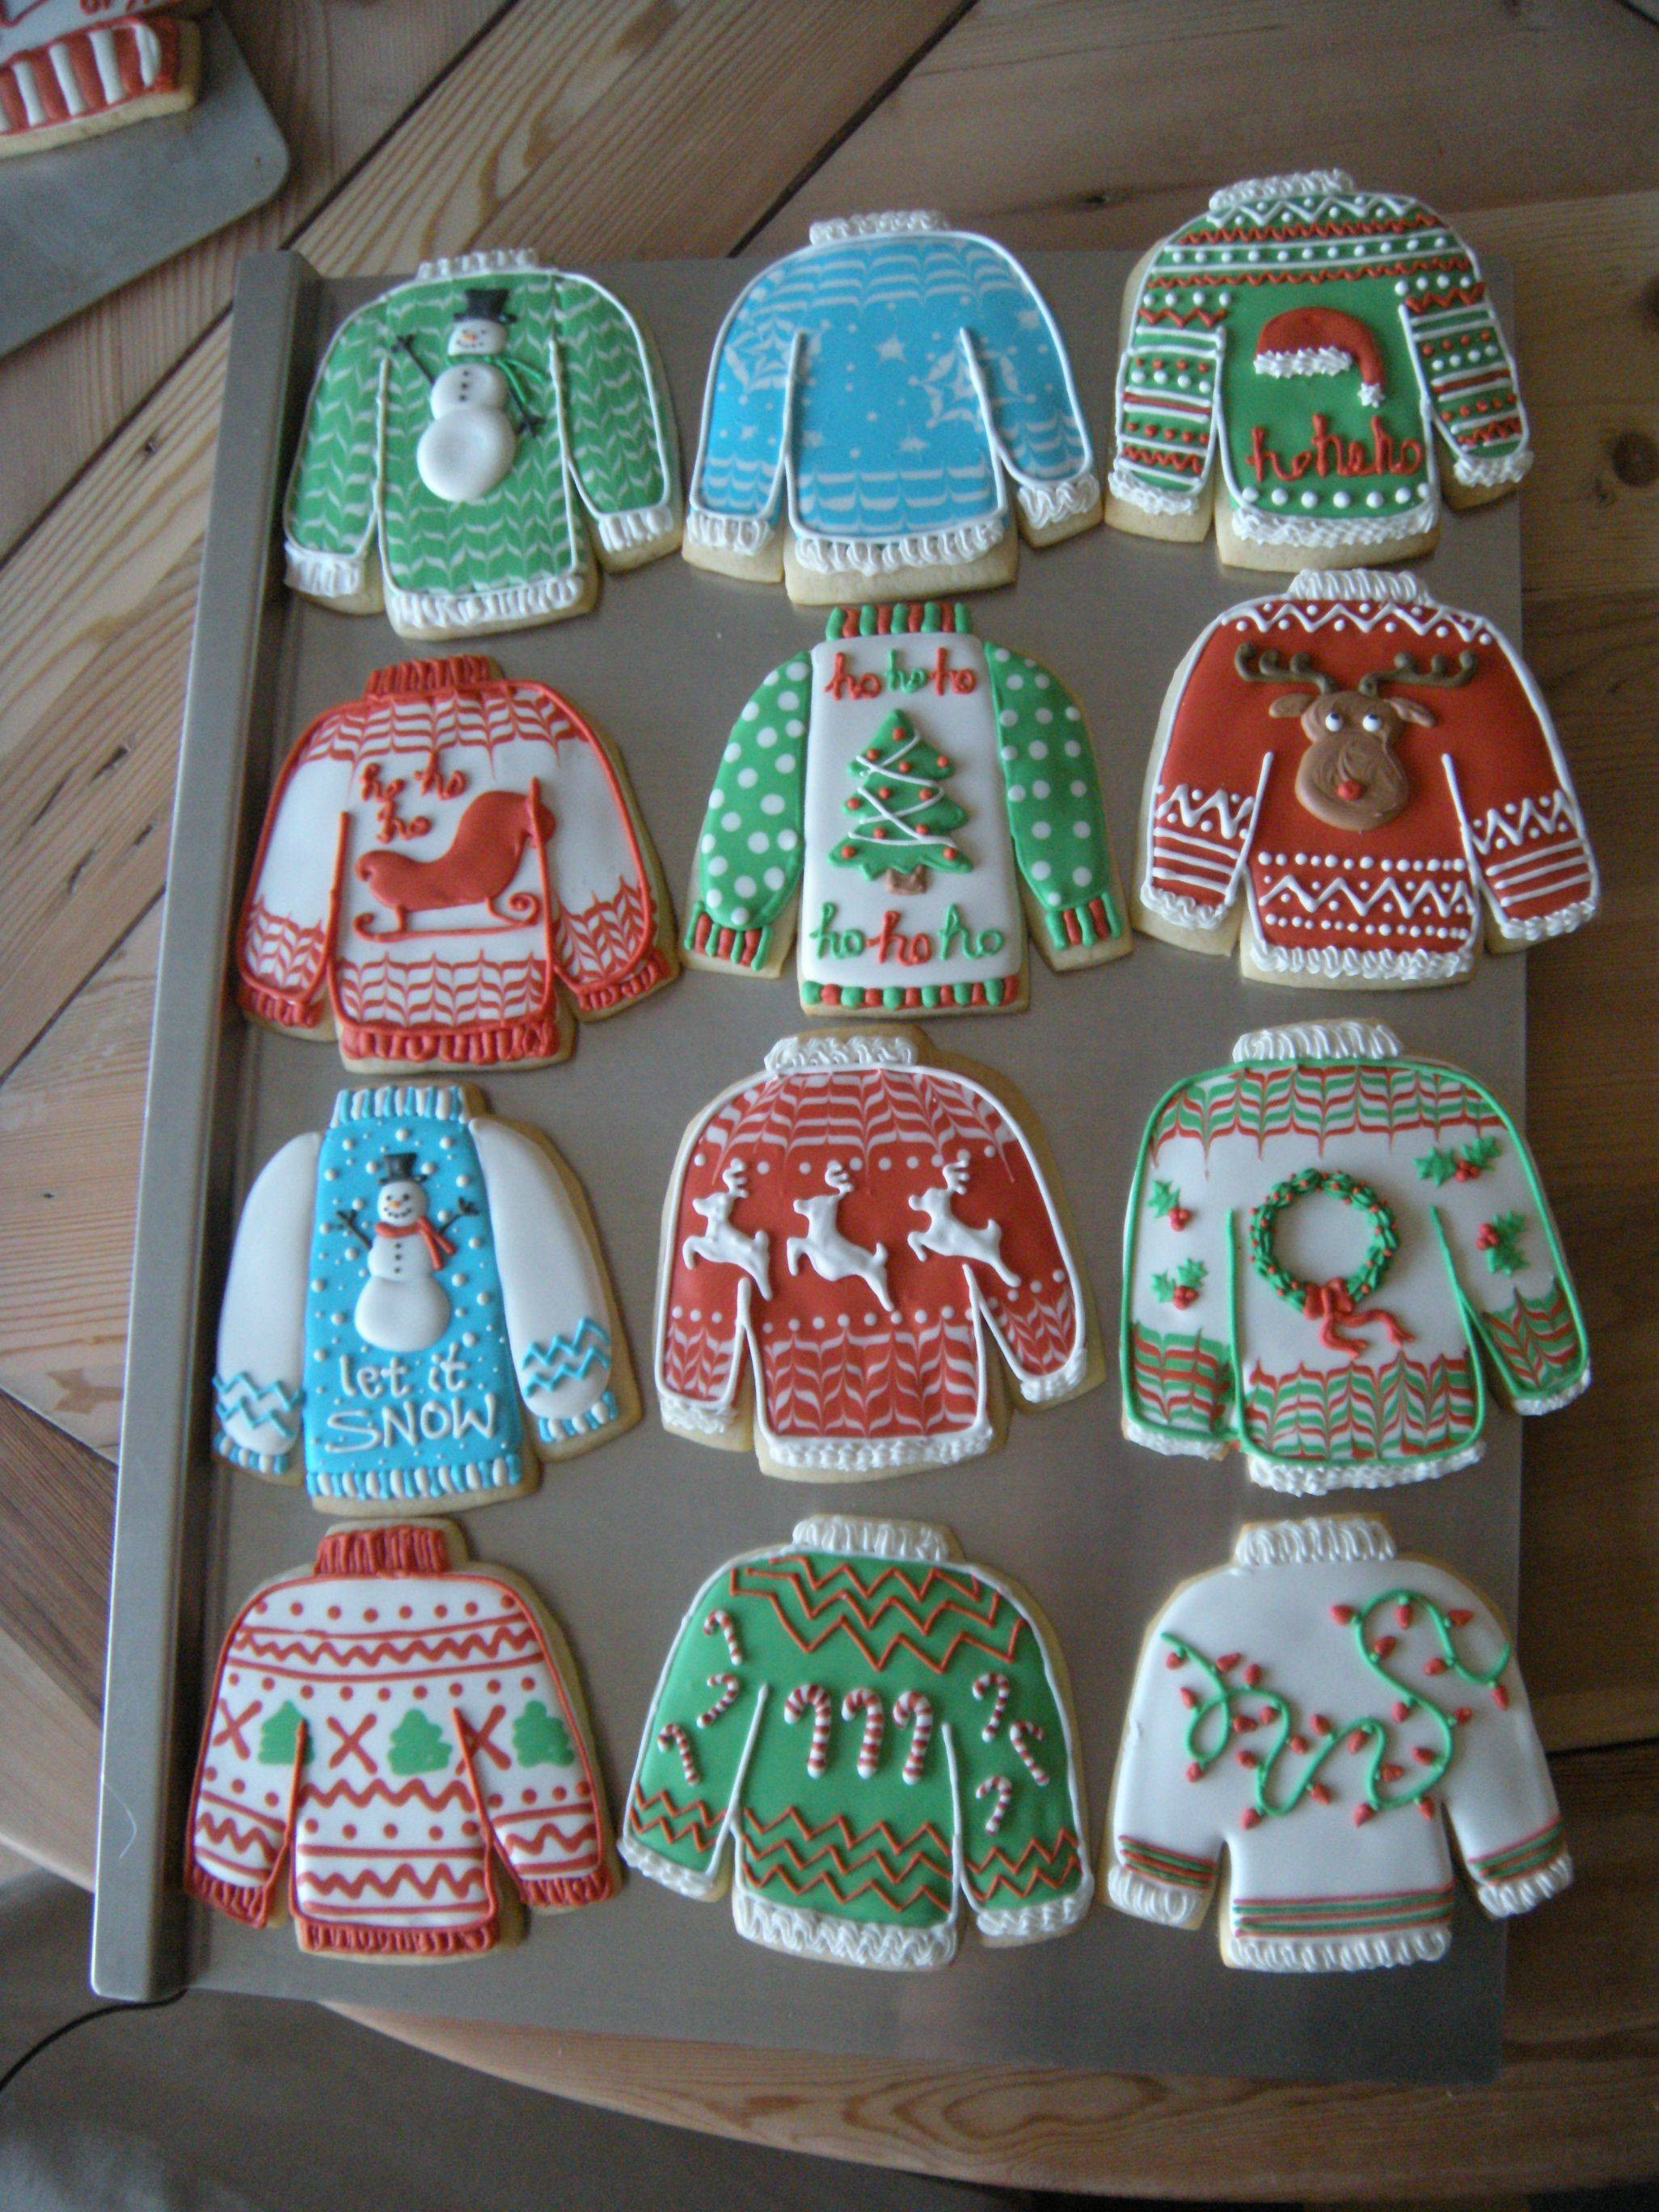 Christmas Sweater Cookies
 I decided to try some "ugly Christmas sweater" cookies